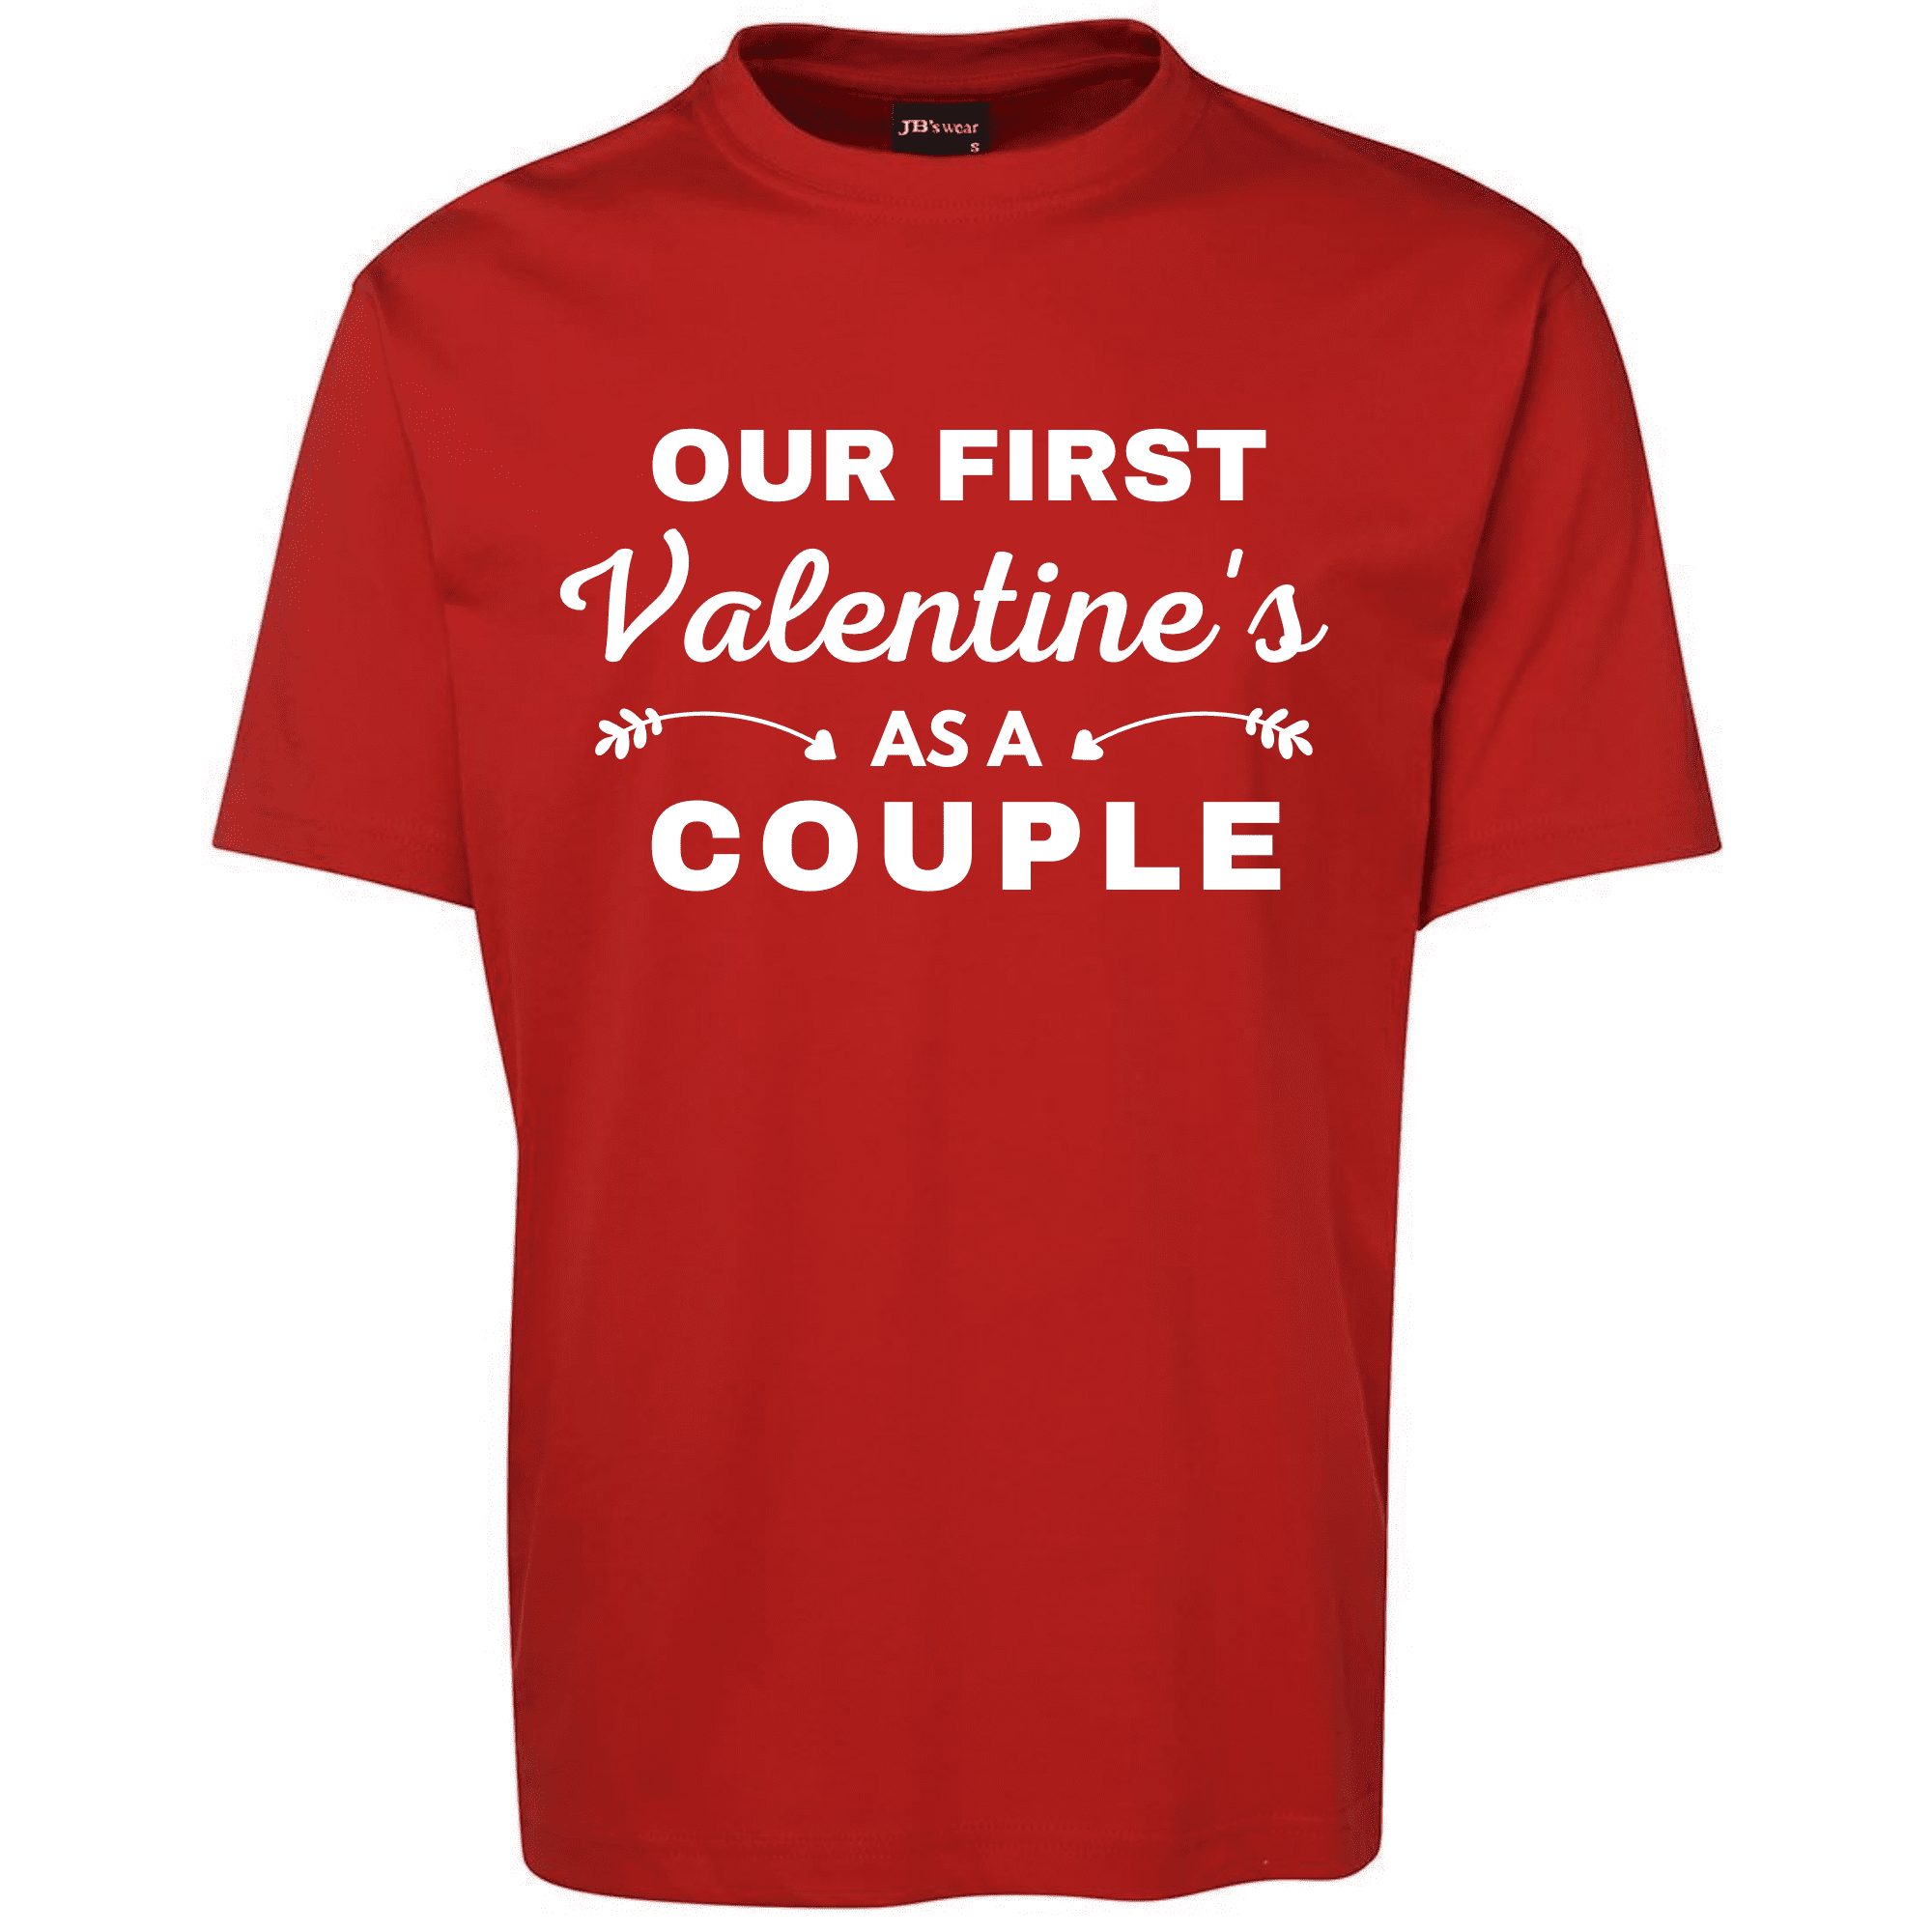 Our-Firts-Valentine-as-Couple_Men